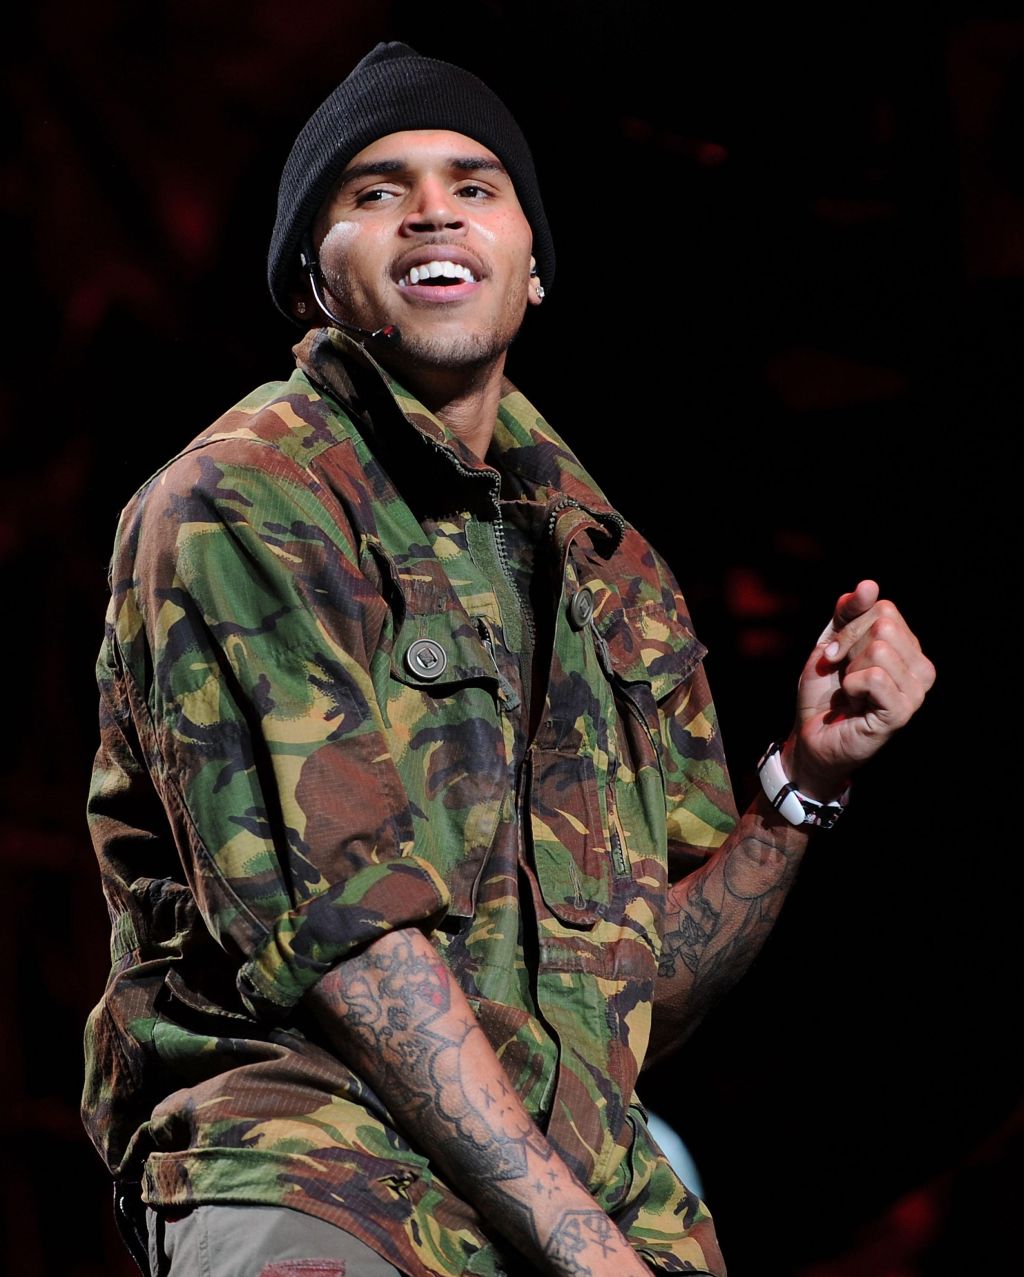 Chris Brown In Concert - Concord, California